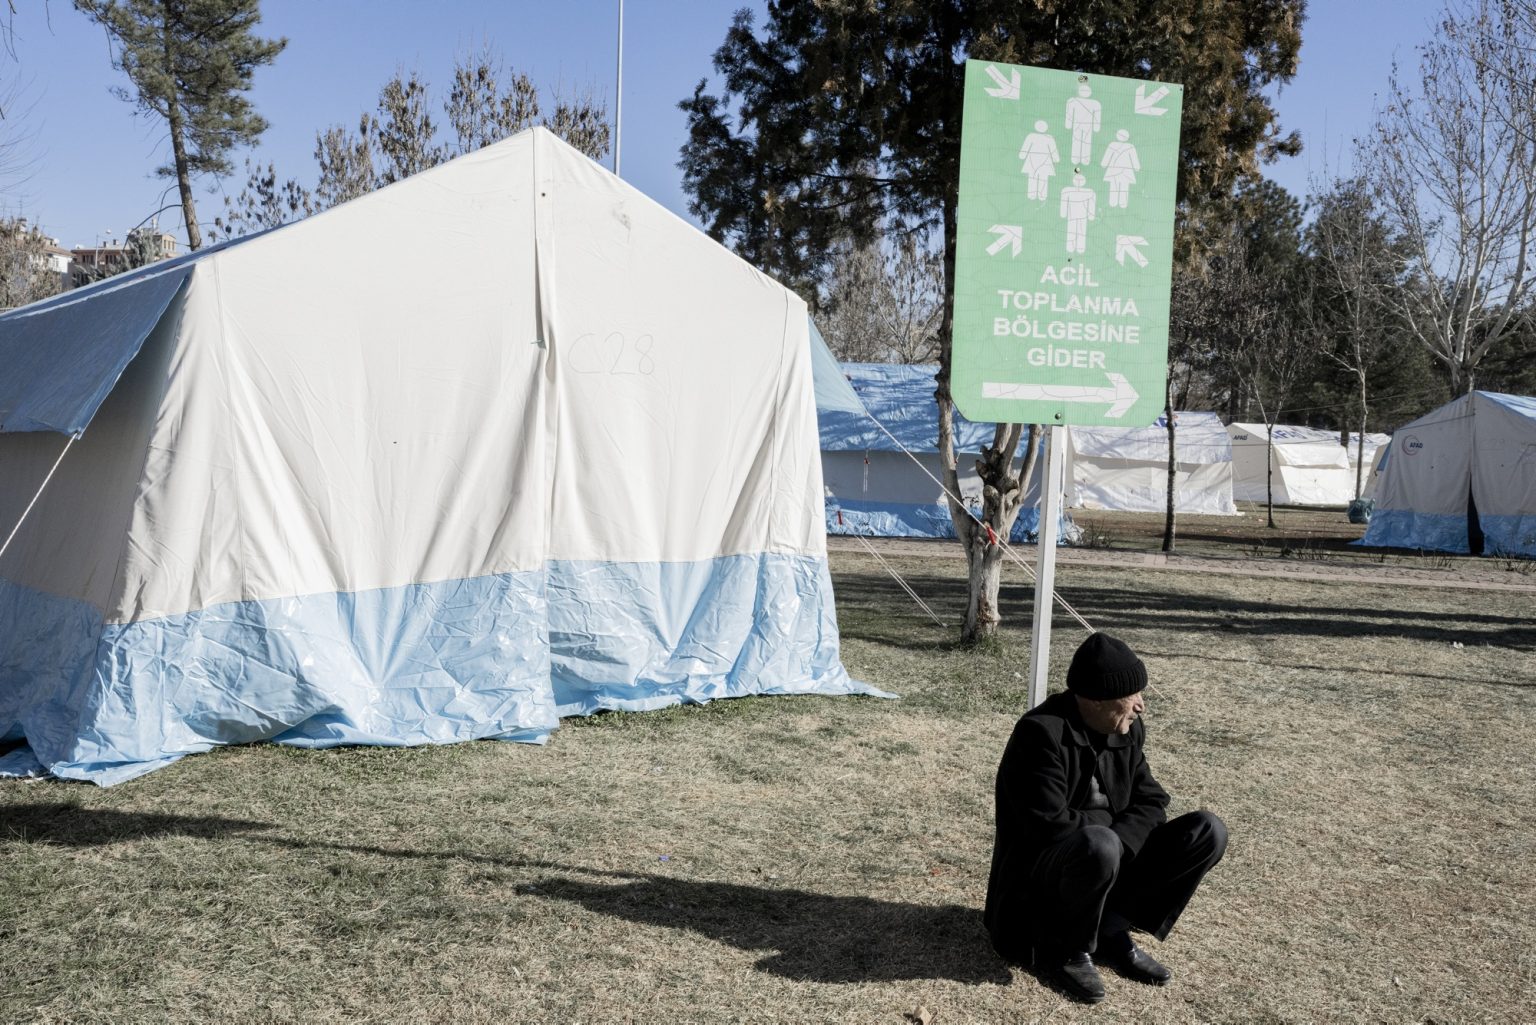 Diyarbakir, Turkey, February 2023 - The aftermath of the earthquake that hit southern Turkey and northern Syria. A man sits in front of a tent in a tent camp in the city of Diyarbakir.><
Diyarbakir, Turchia, febbraio 2023  Le conseguenze del terremoto che ha colpito la Turchia del Sud e la Siria del nord.